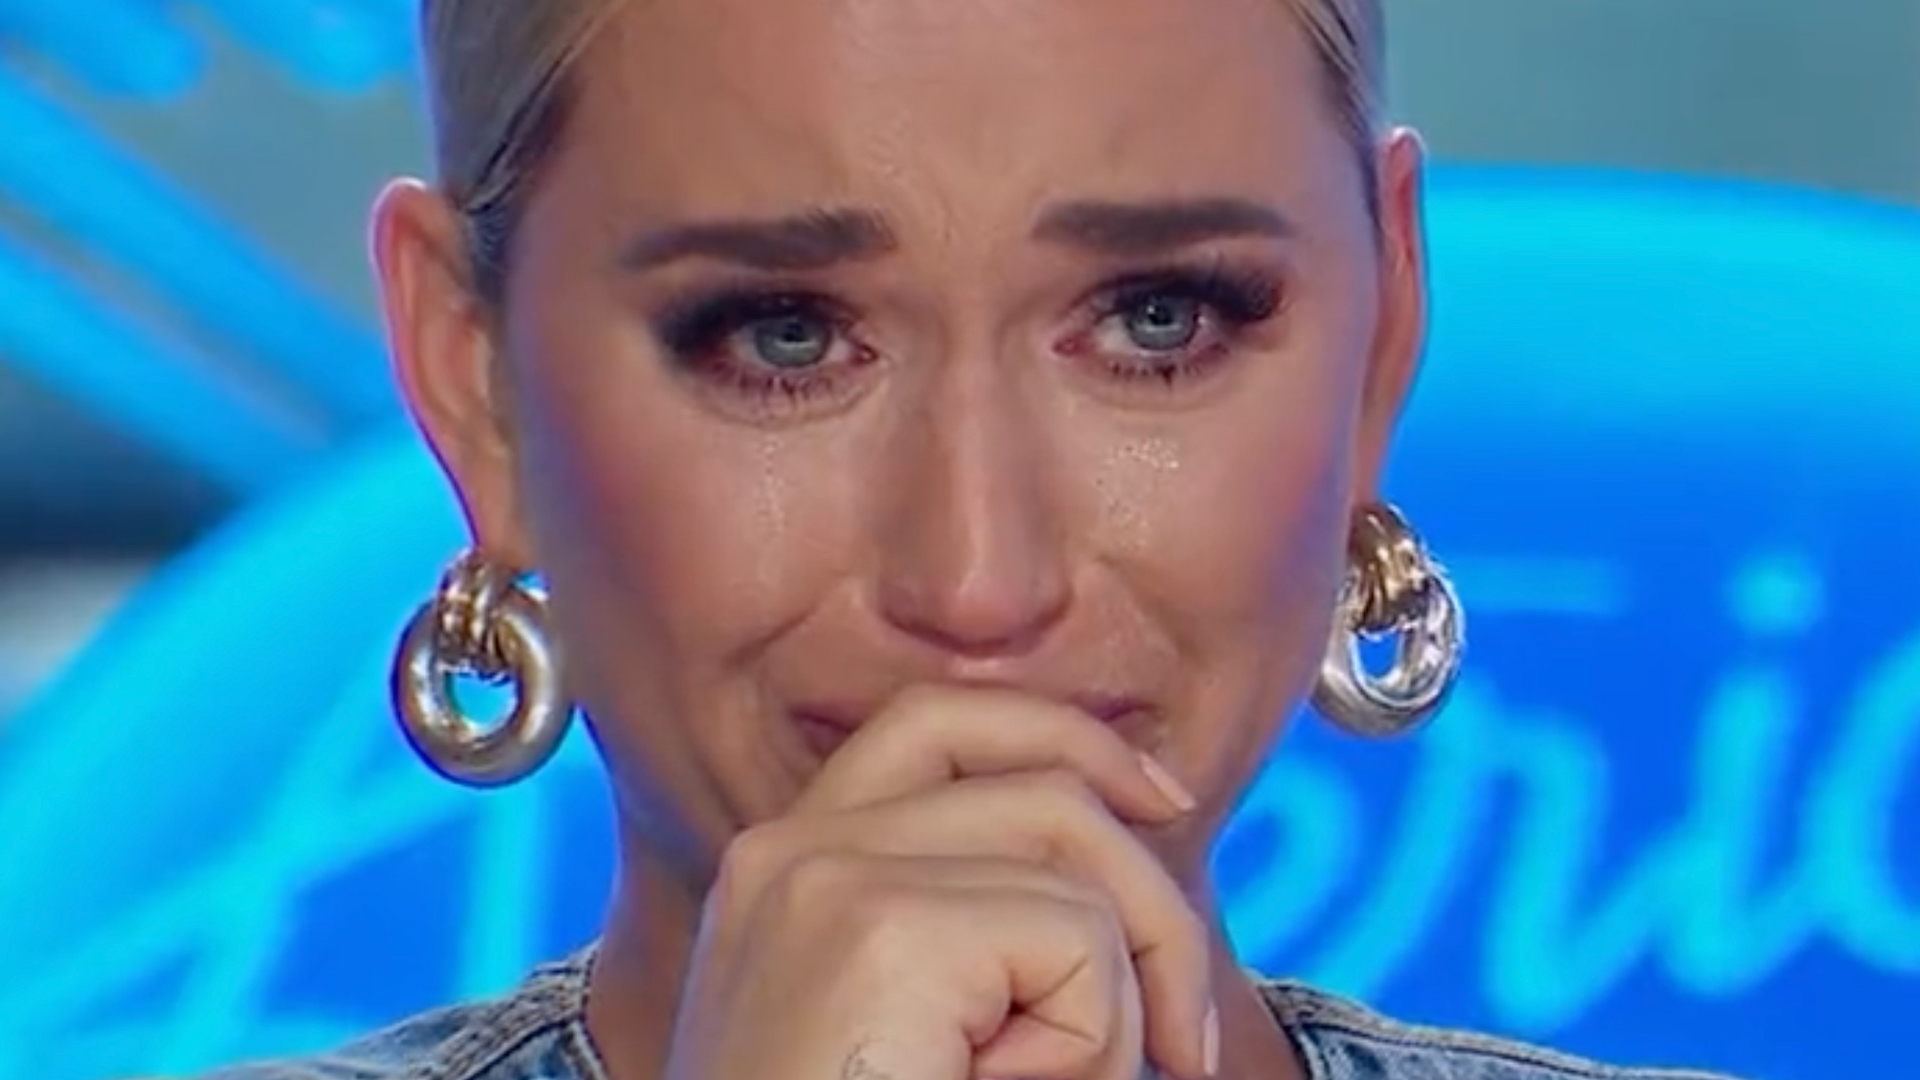 Katy Perry admits she ‘will be crying at anything’ during American Idol finale as rumors swirl about judge’s replacement [Video]